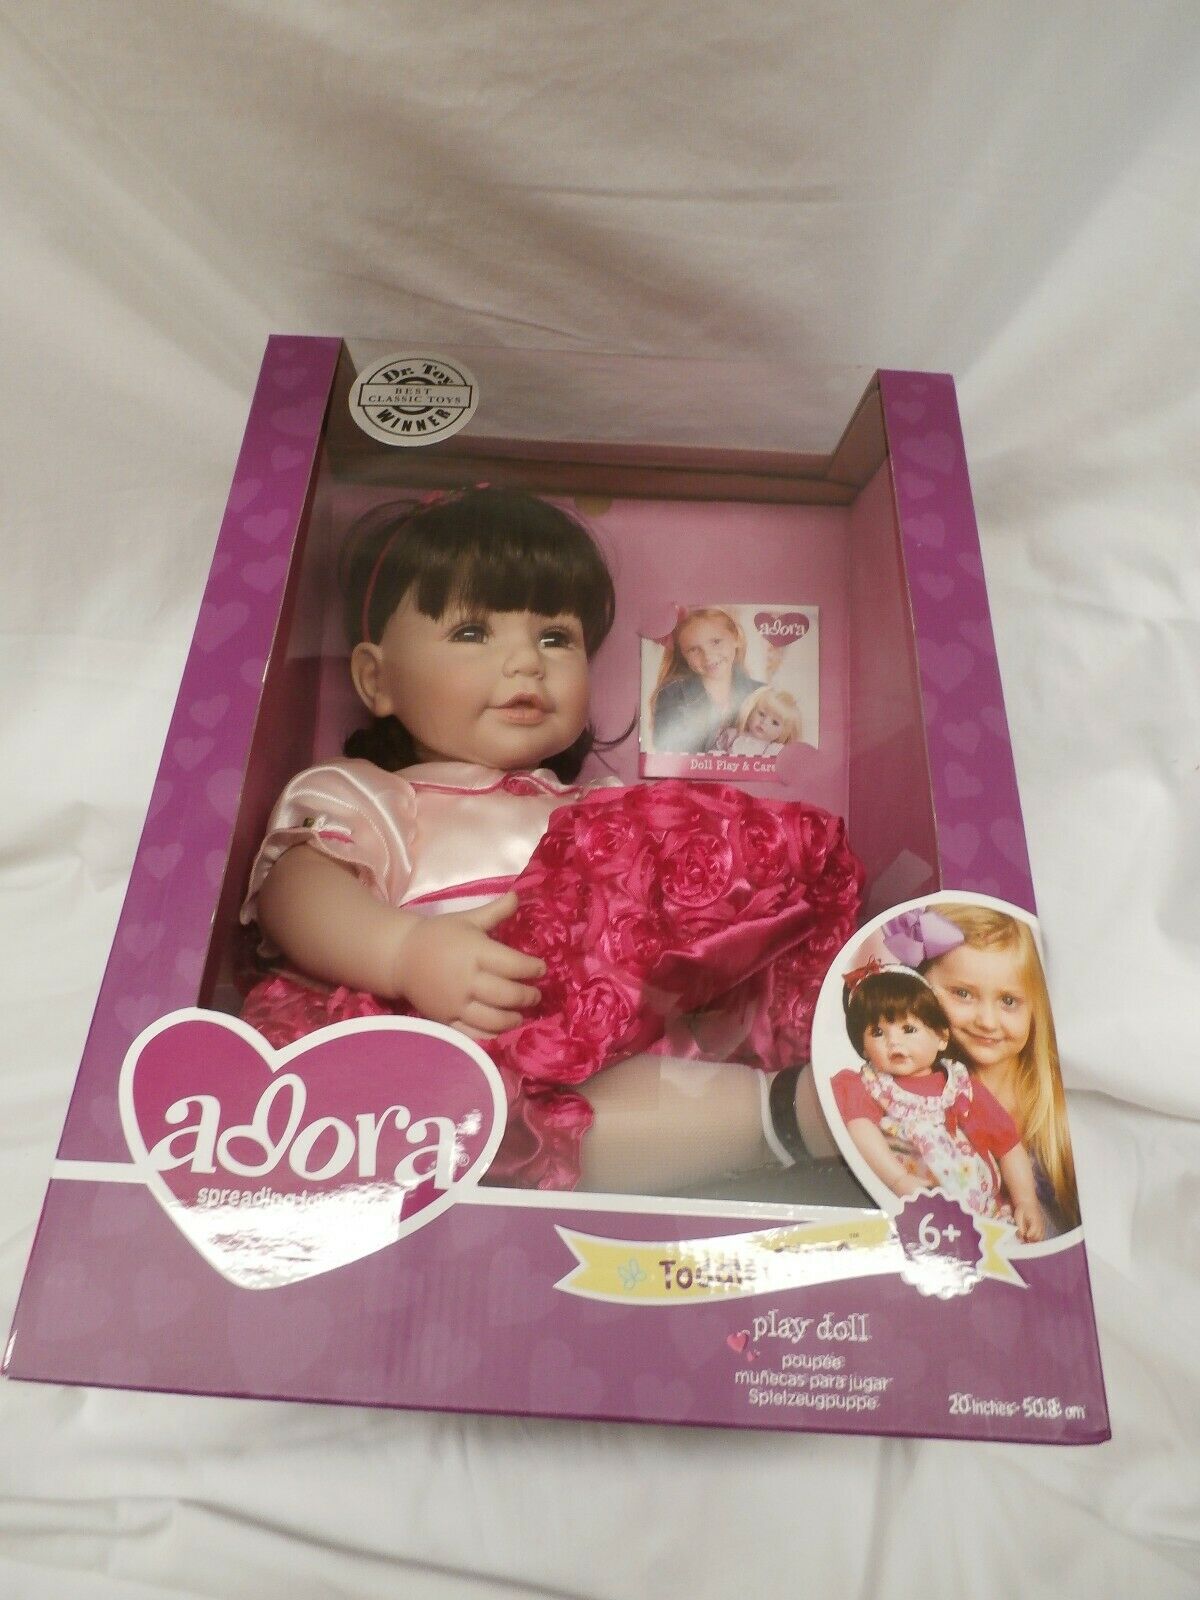 Adora Charisma Brand Vinyl Toddler Time Baby "party Perfect"  20014021 New